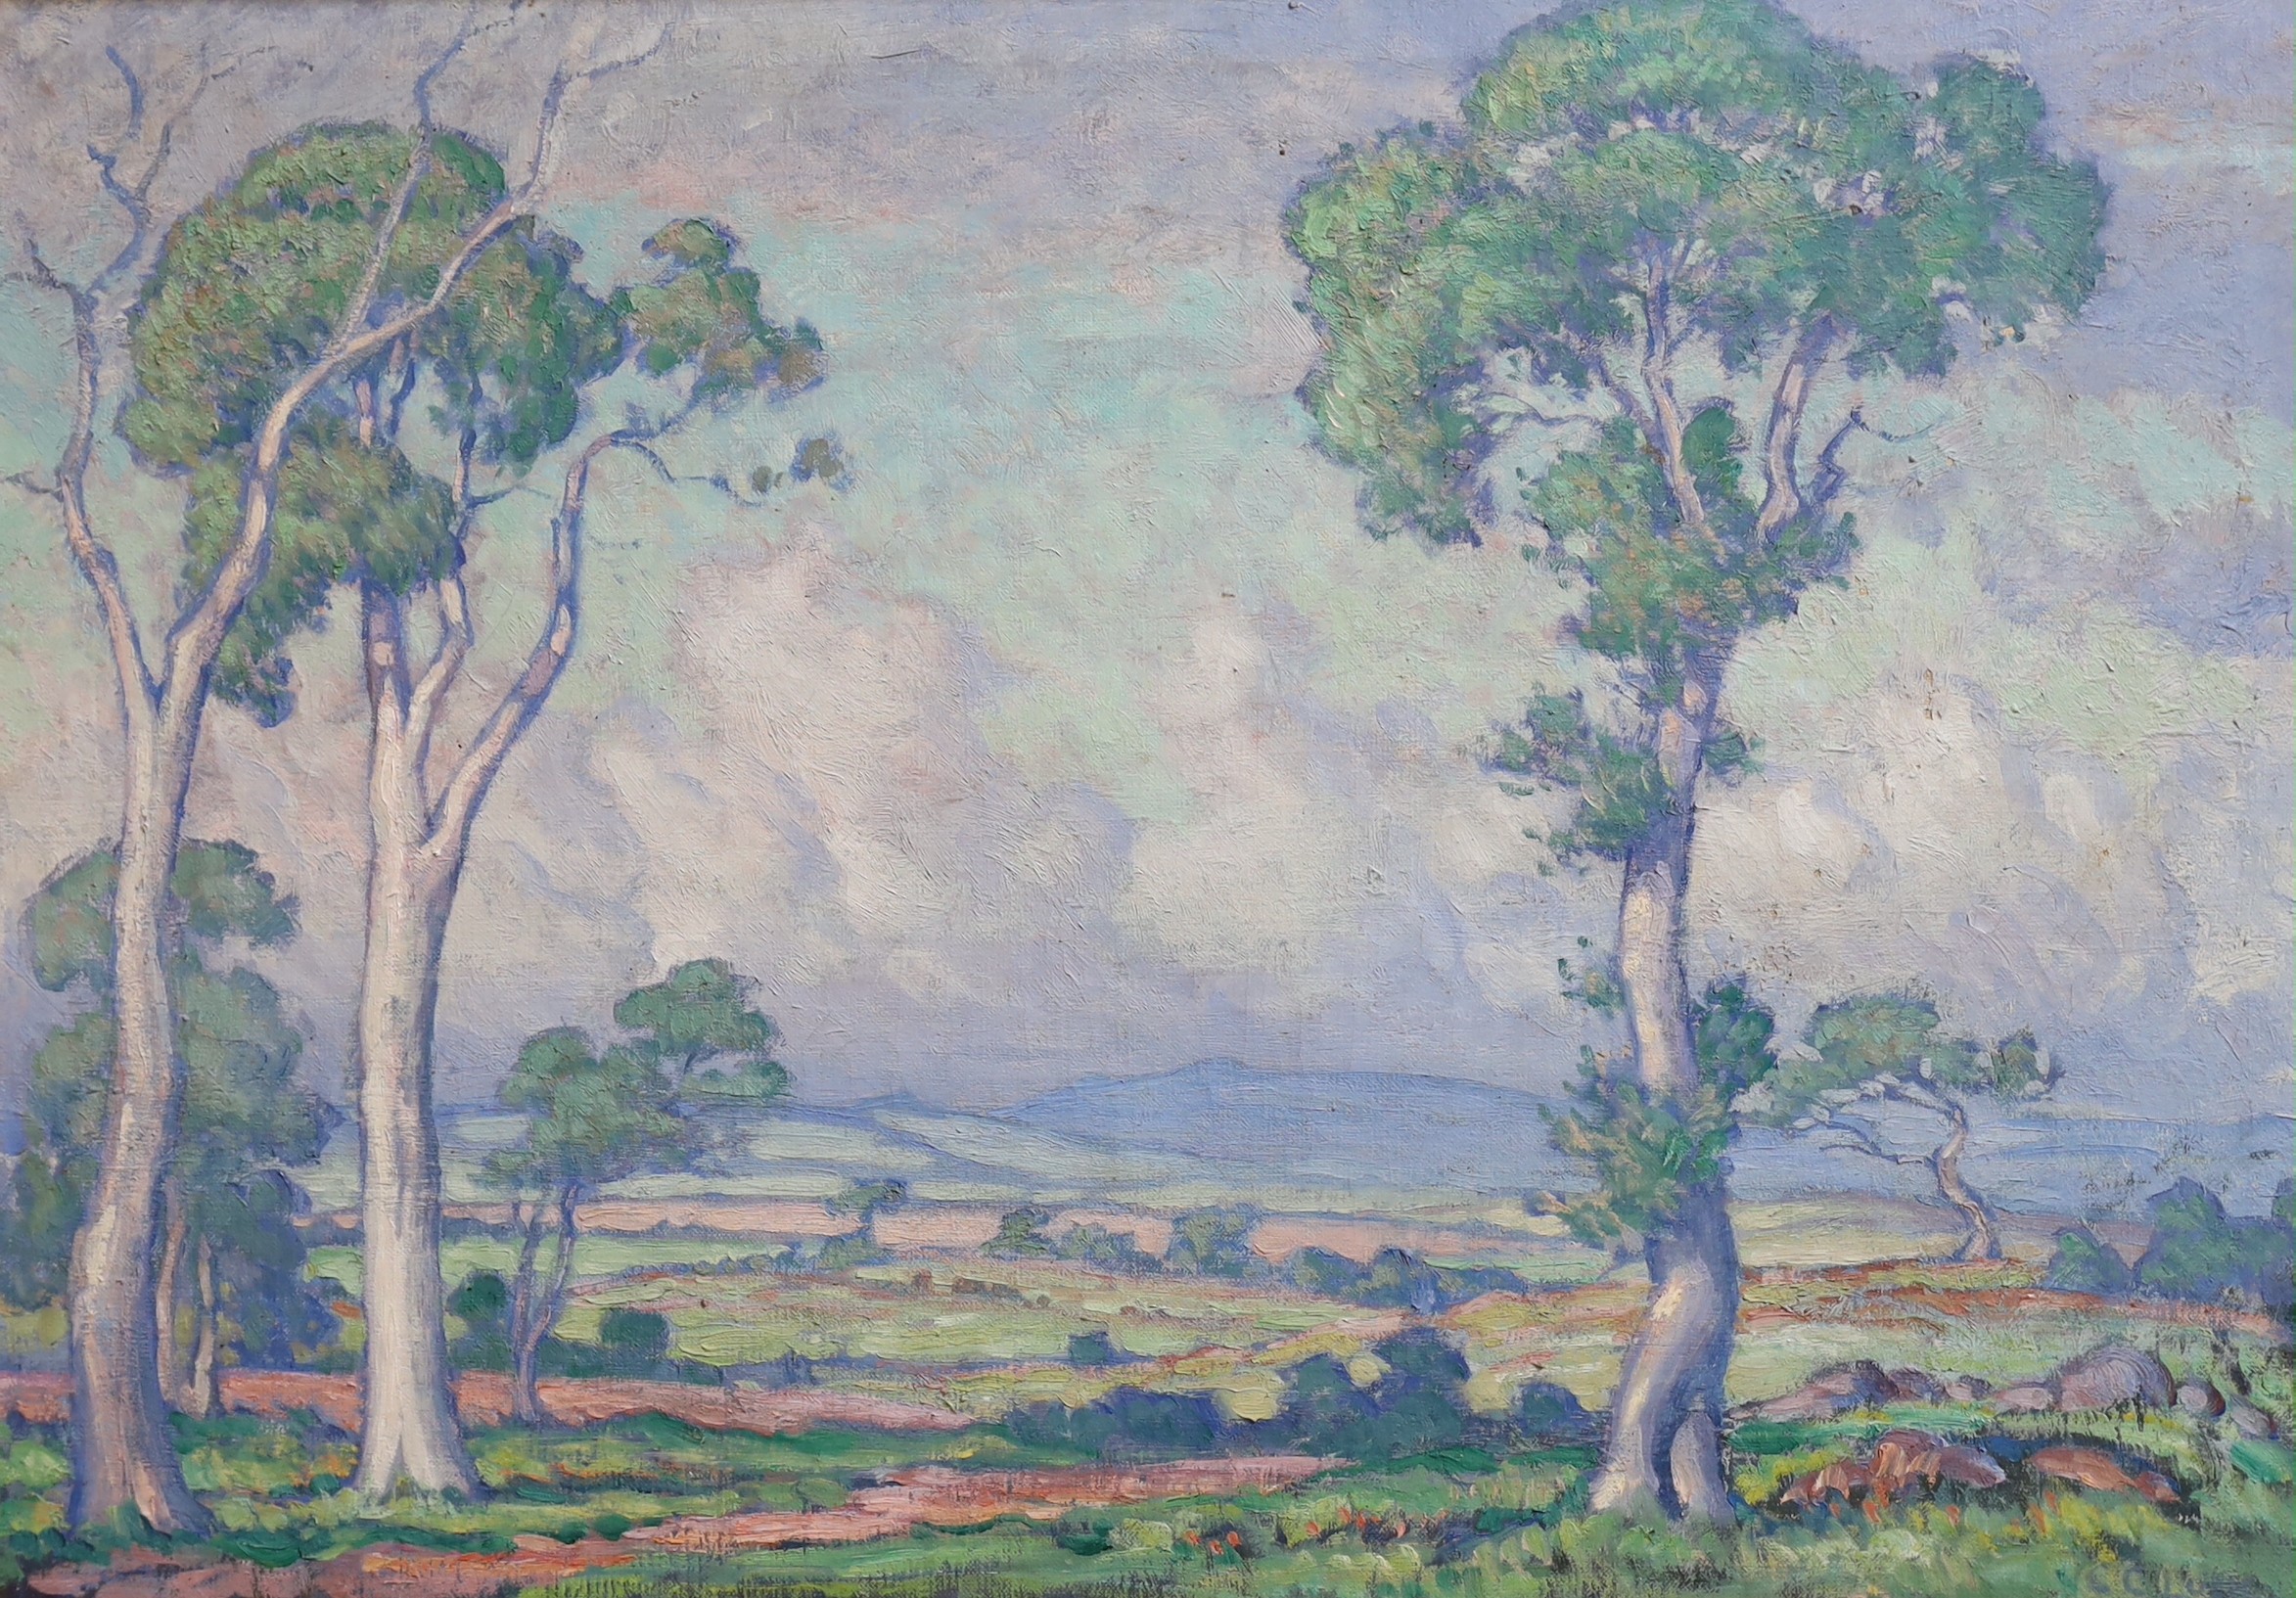 CCL , Open landscape with trees to the foreground, possibly Australia with eucalyptus trees, oil on canvas, 45 x 64cm